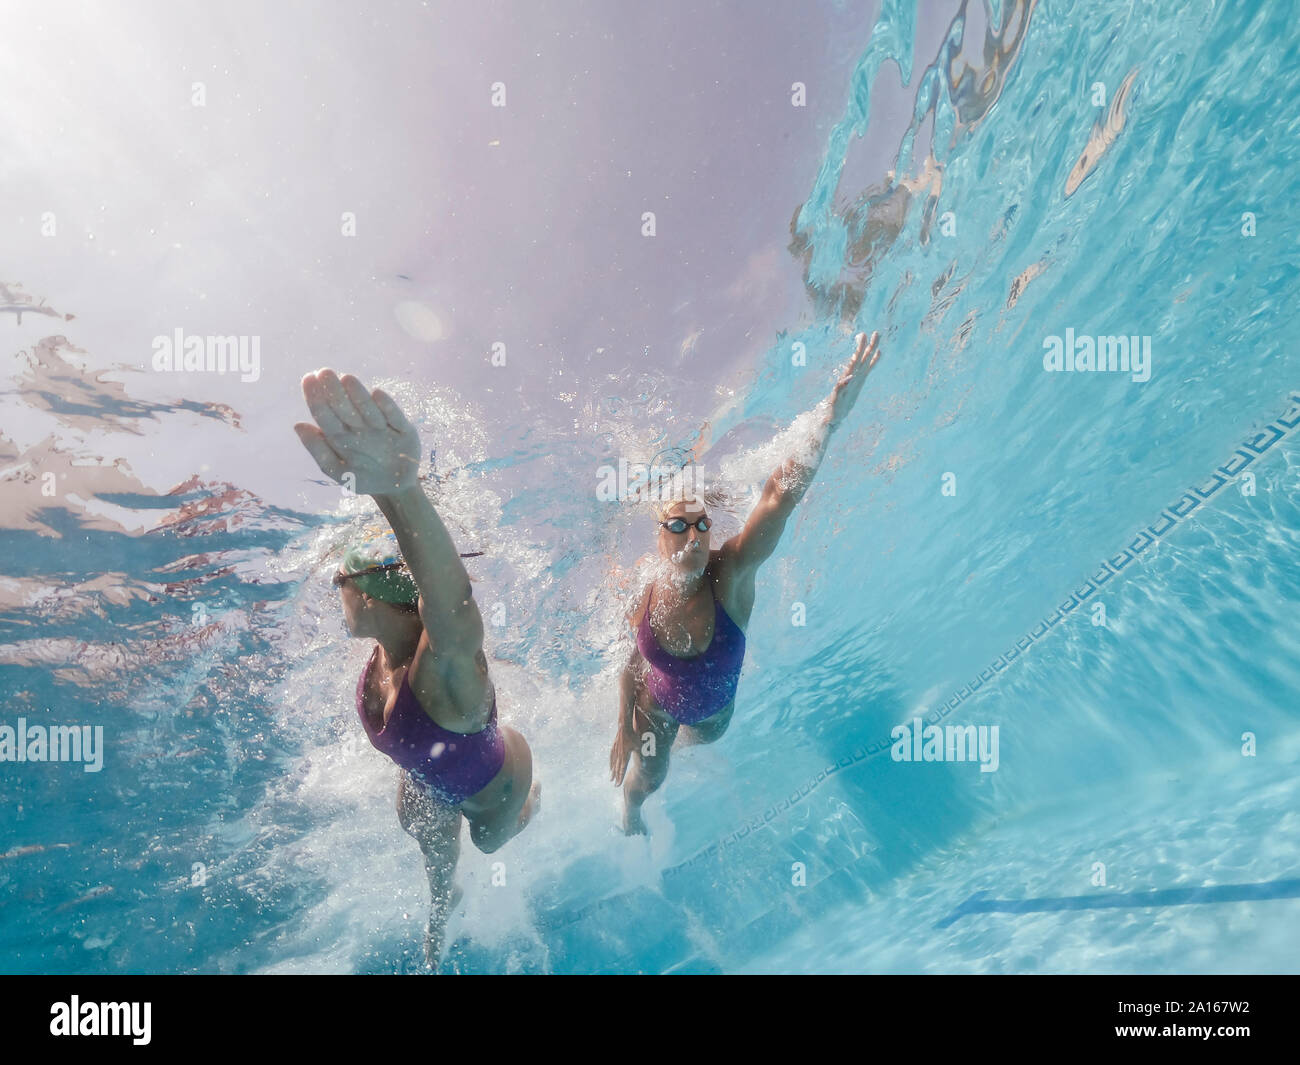 Two women swimming in a pool Stock Photo